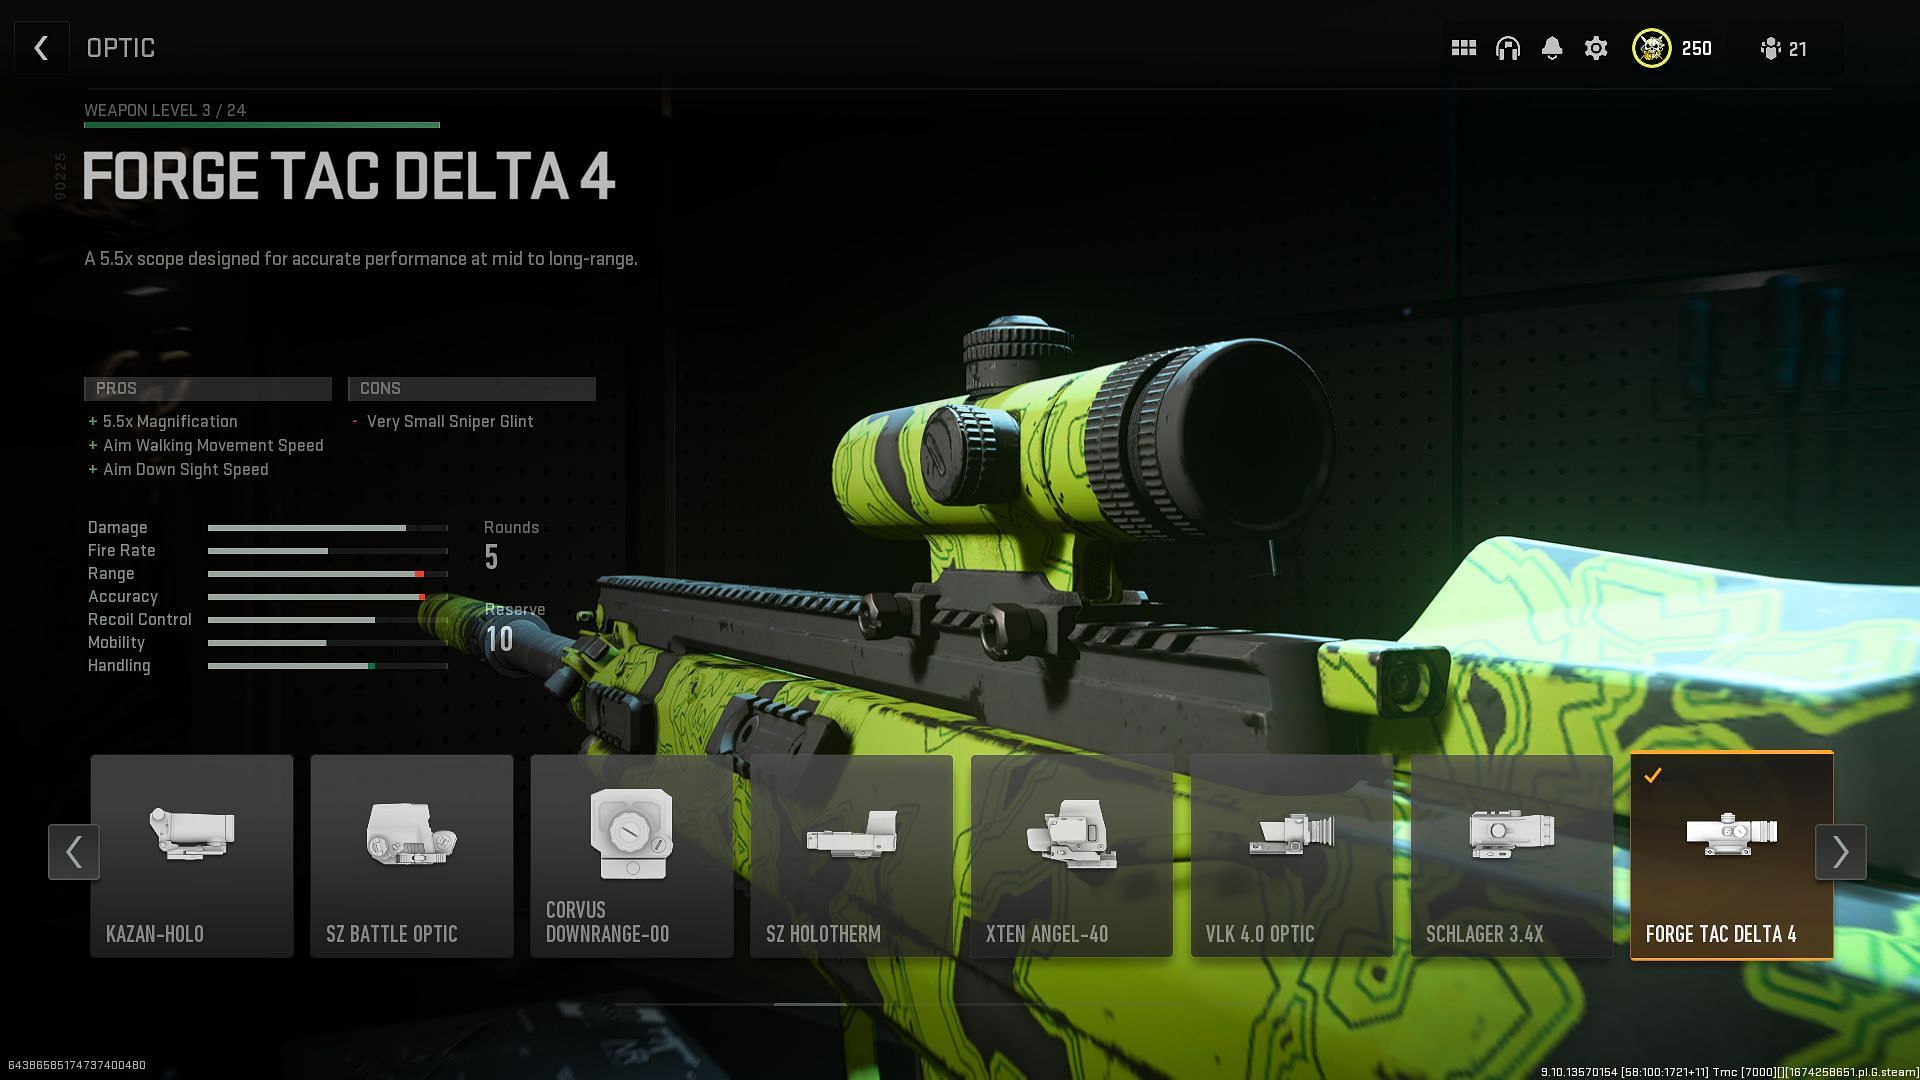 Forge Tac Delta 4 on the Signal 50 (Image via Activision)